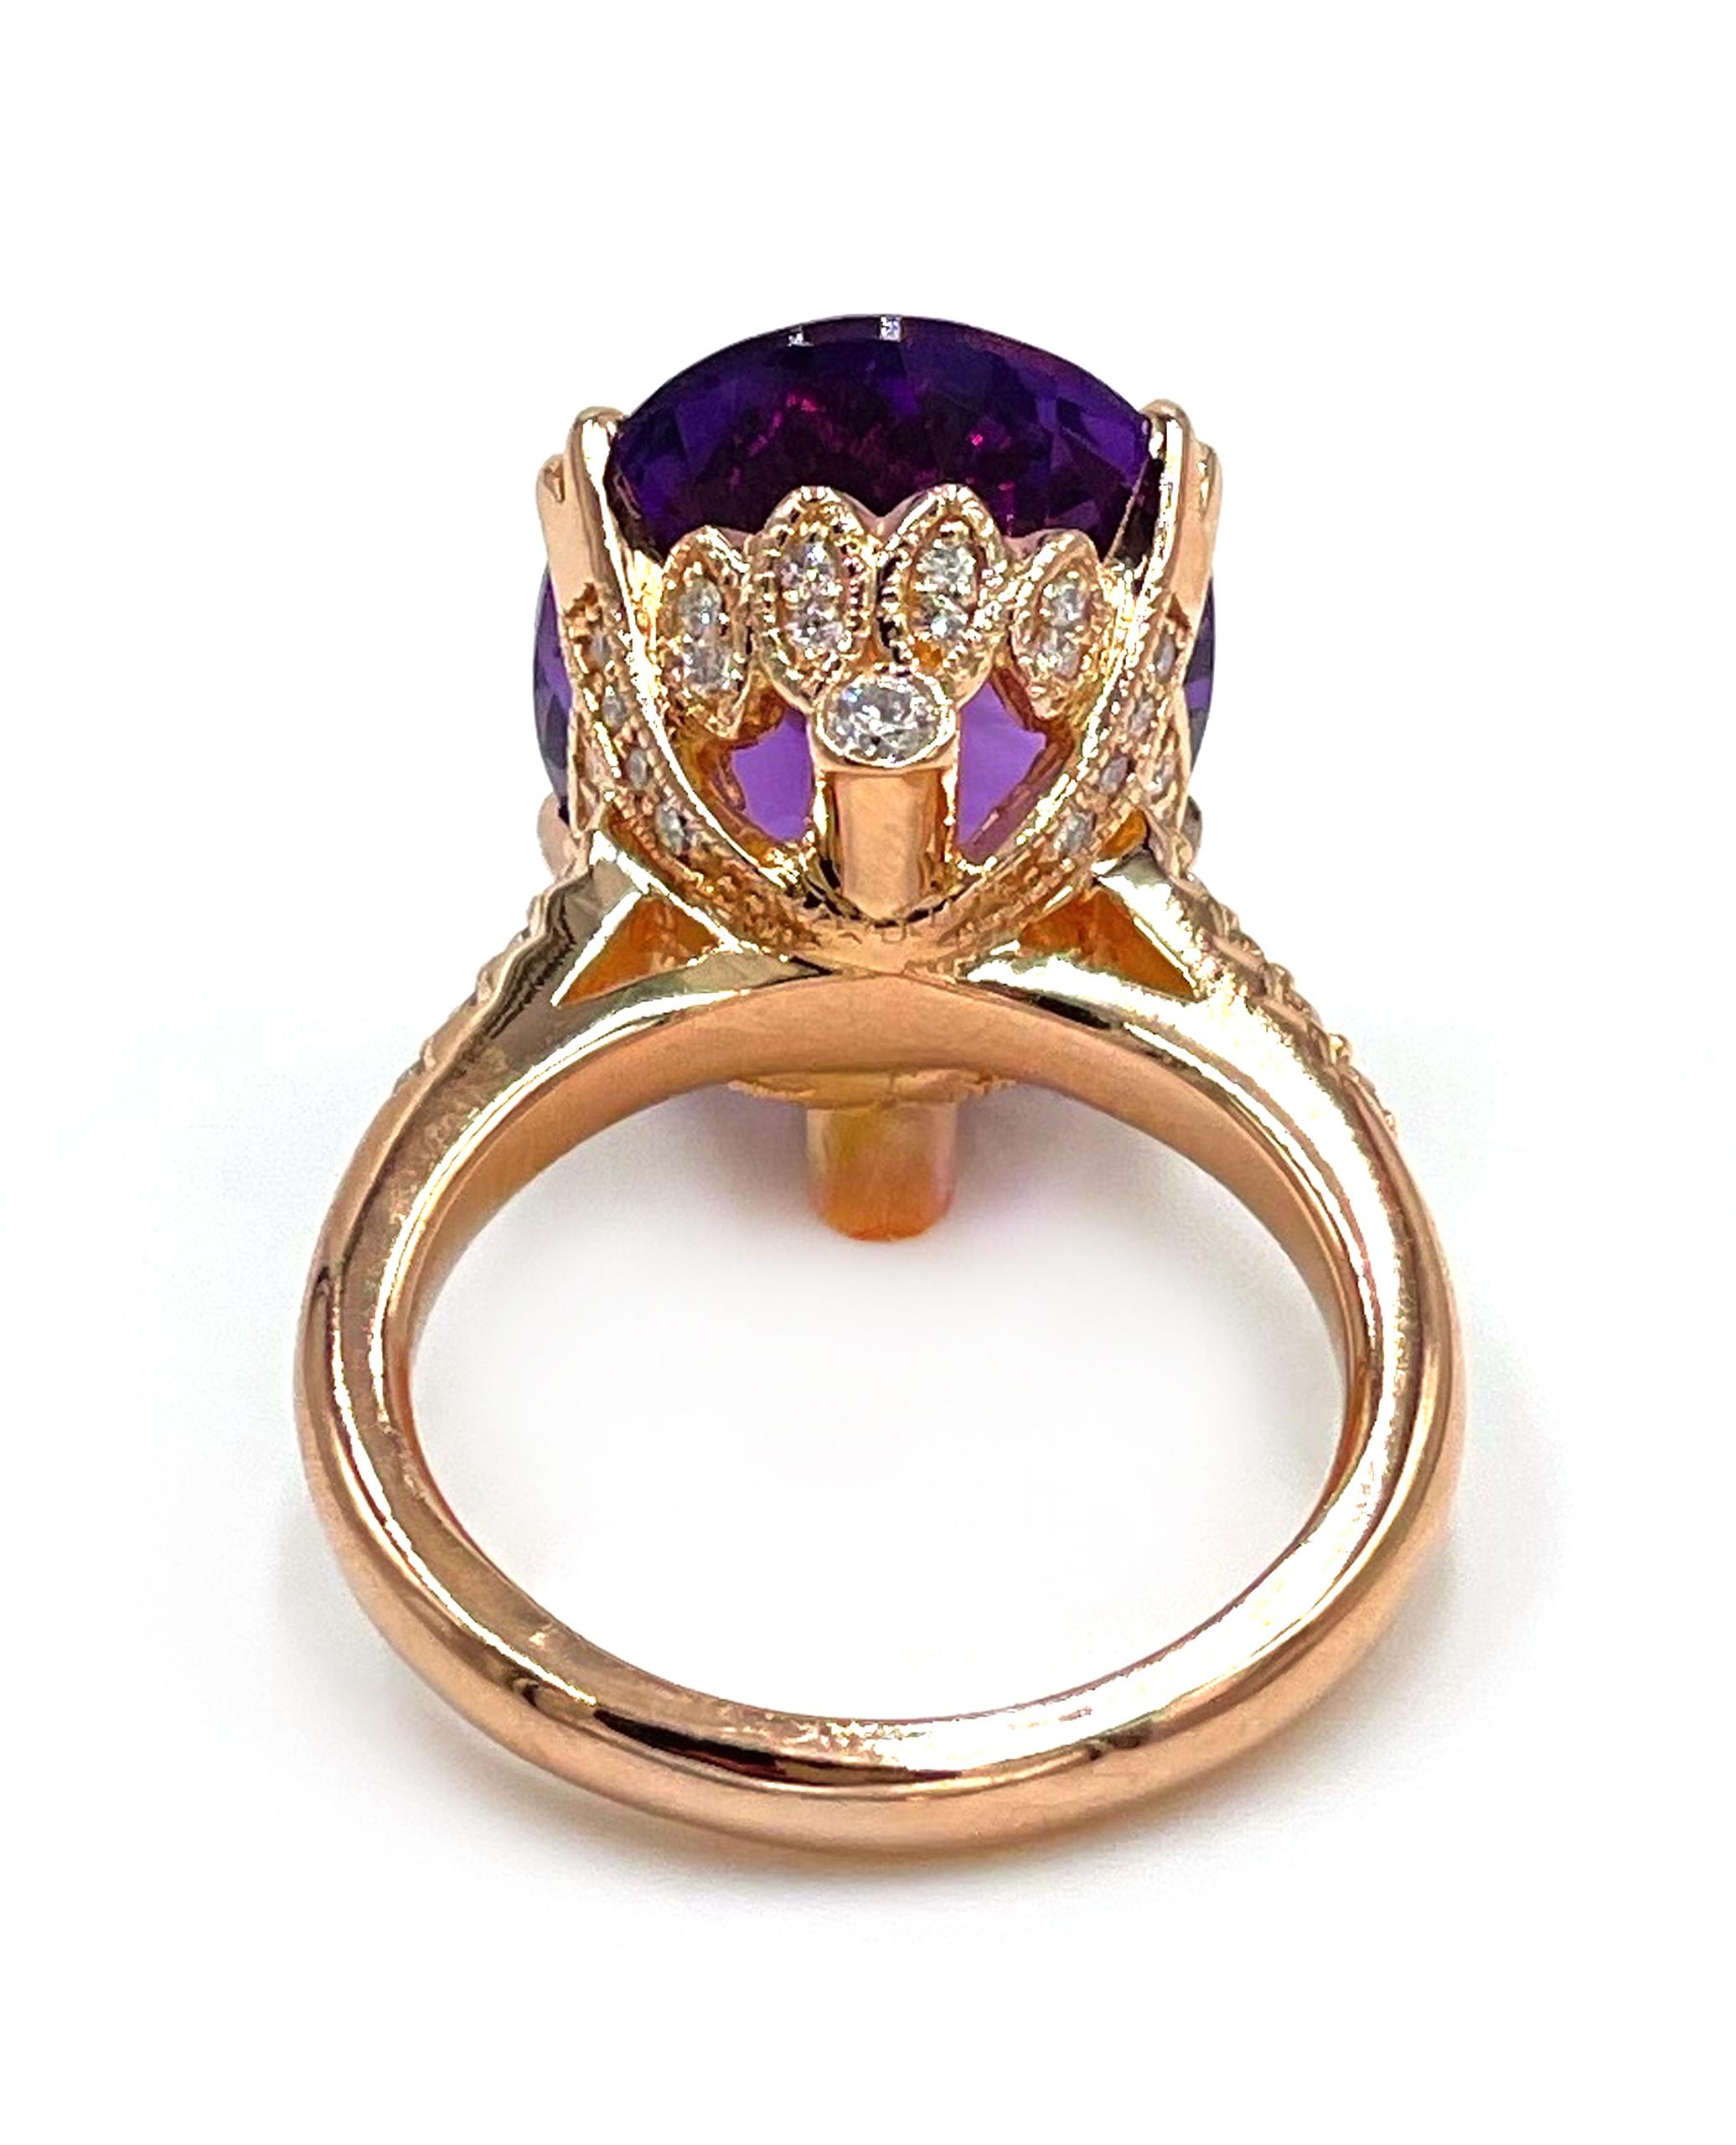 Contemporary 14K Rose Gold Antique Inspired Right Hand Ring with Diamonds and Amethyst For Sale